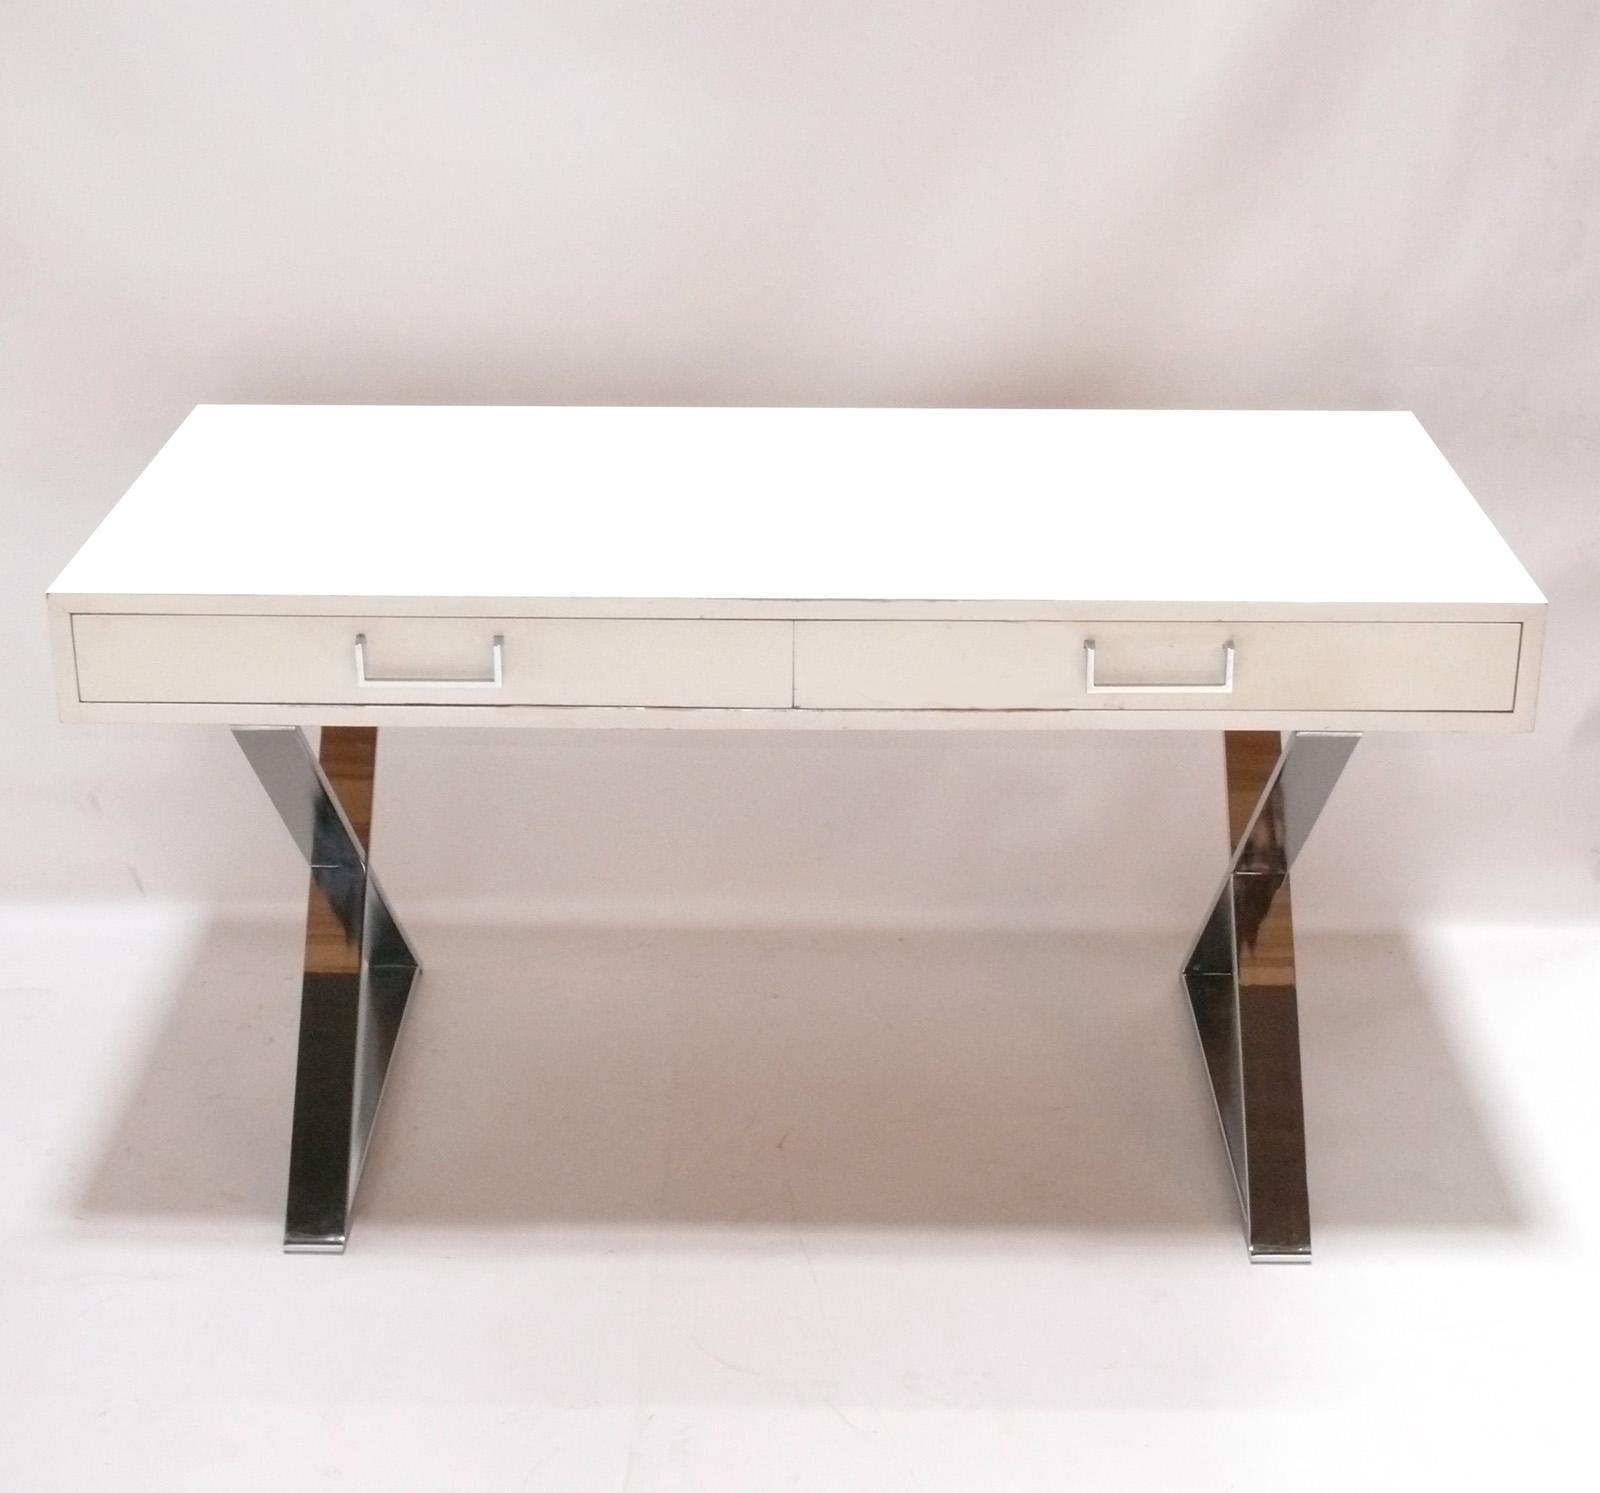 Clean Lined X Base Desk, in the style of Milo Baughman, American, circa 1970s. This desk is currently being refinished and can be completed in your choice of color. The desk is finished on the back side and could be floated in a room, or used as a